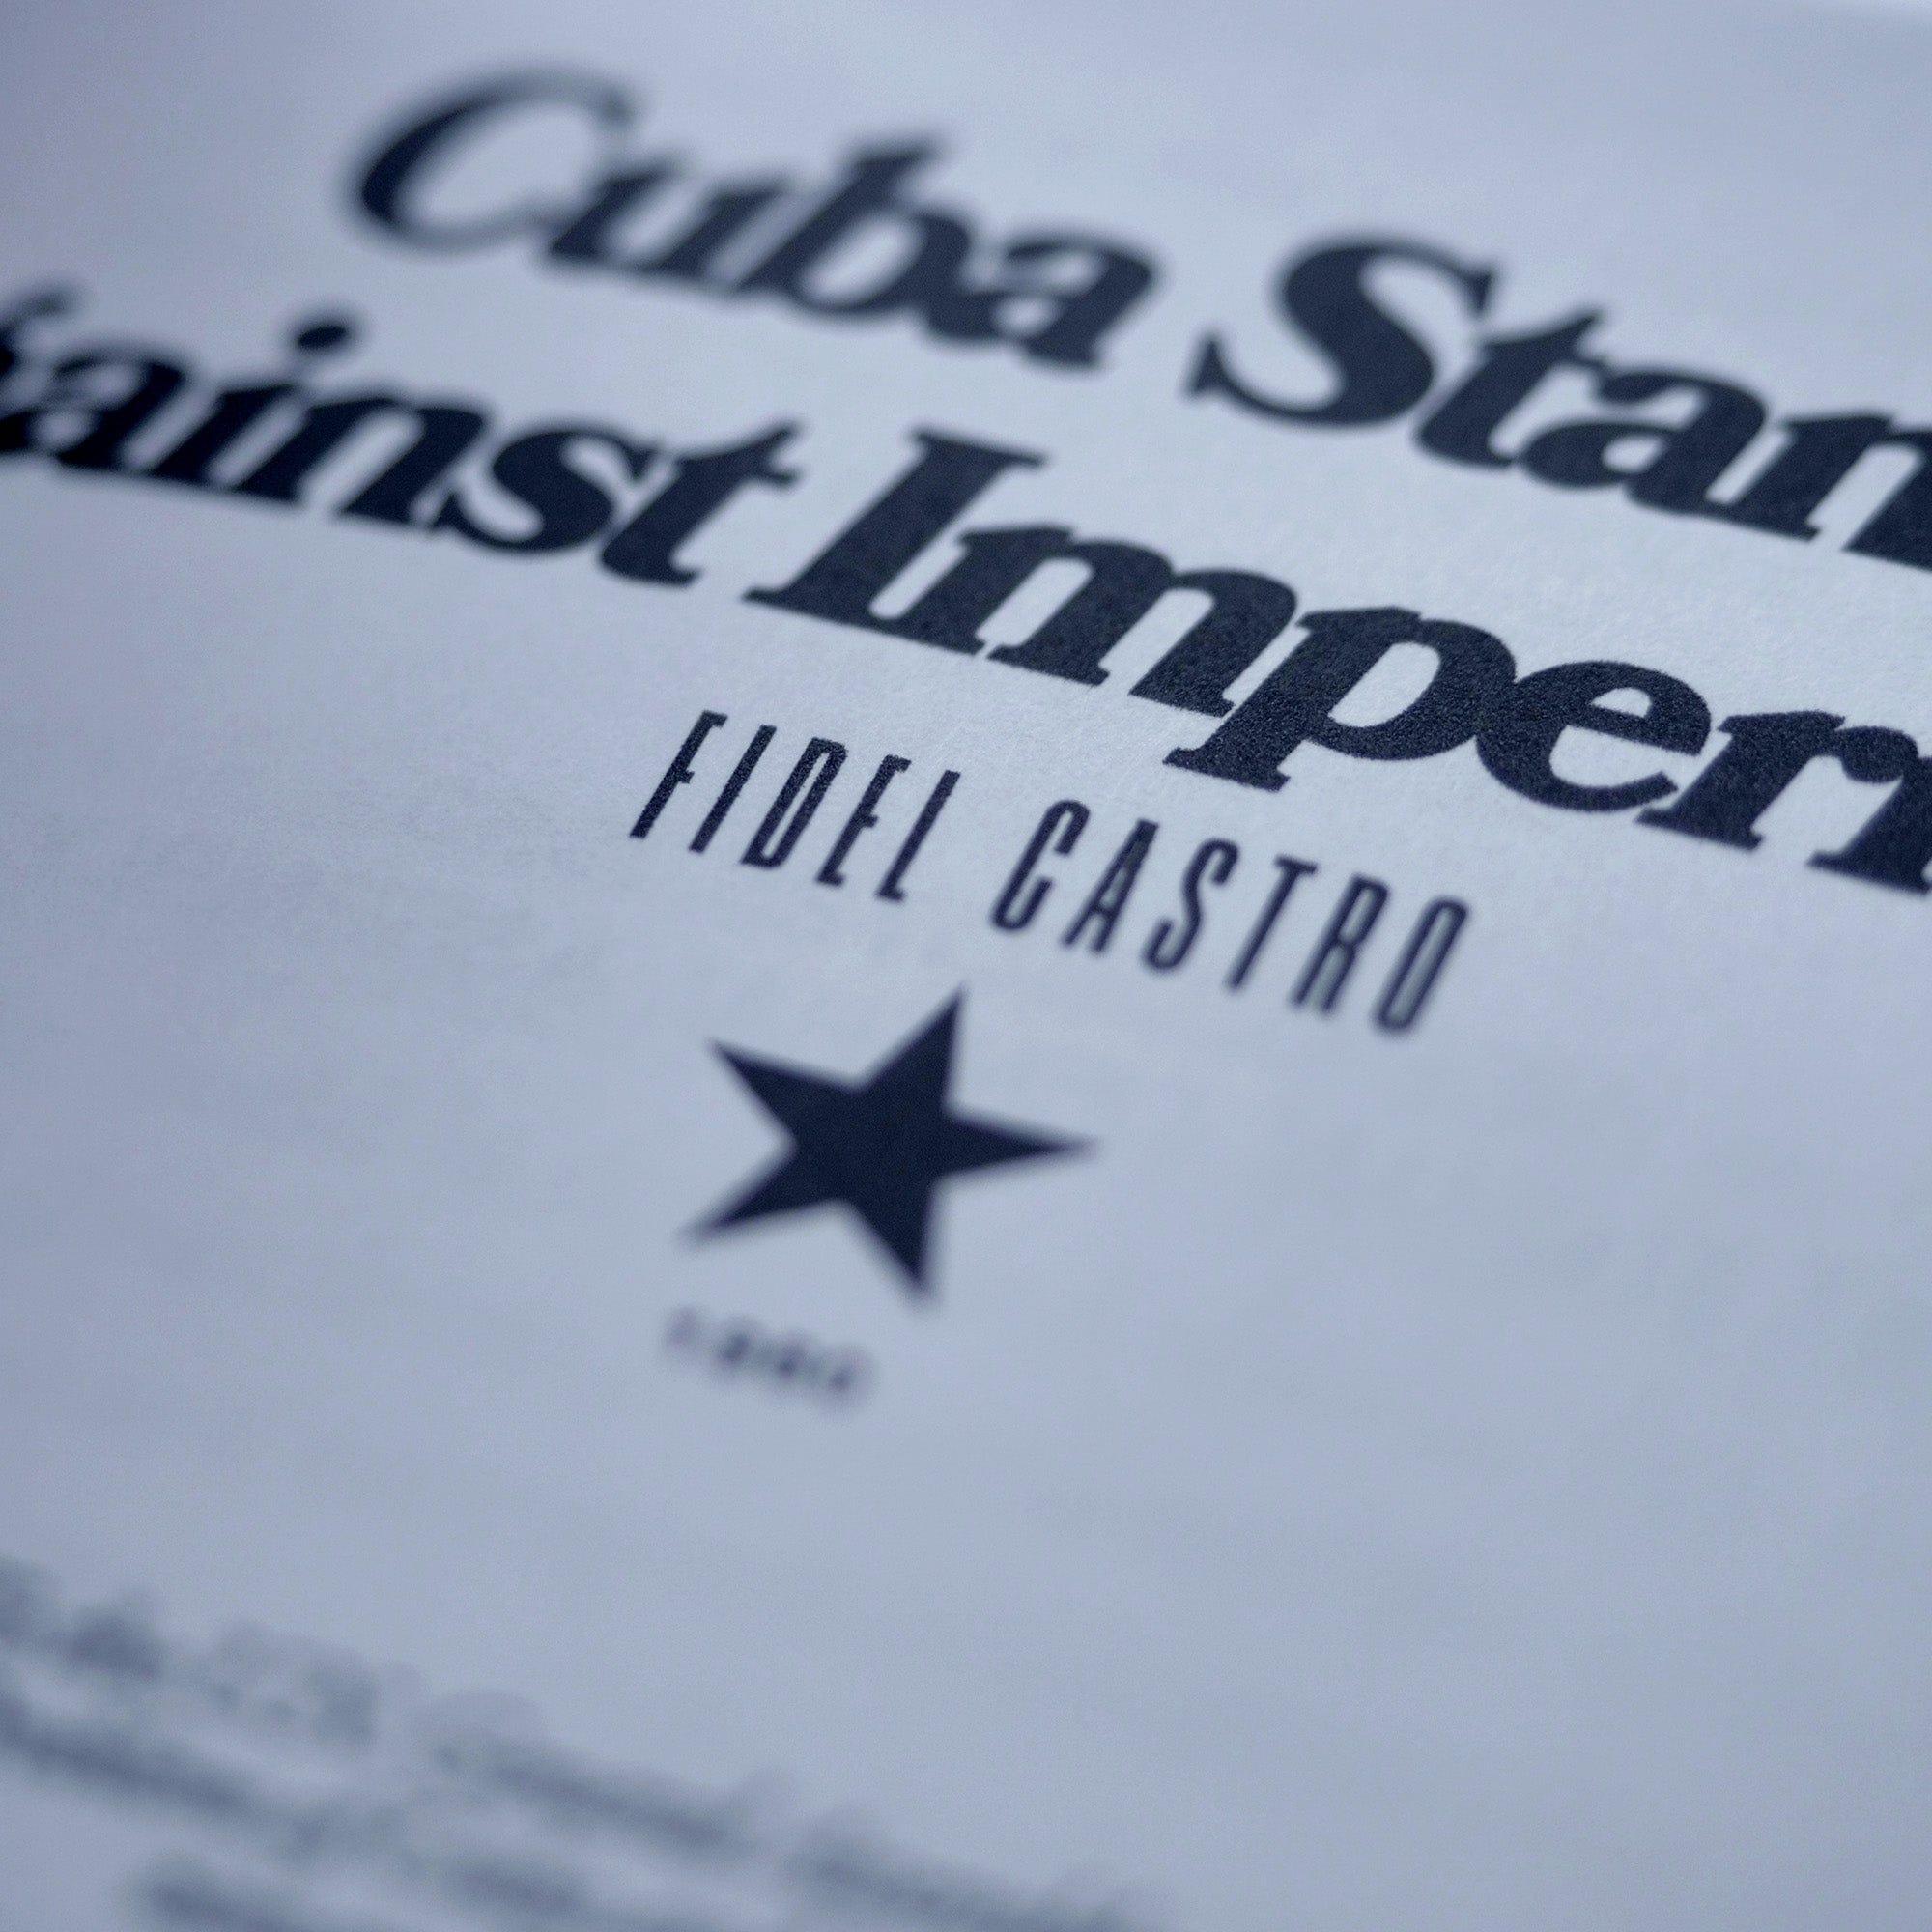 1960: Cuba Stands Against Imperialism! (Fidel Castro)